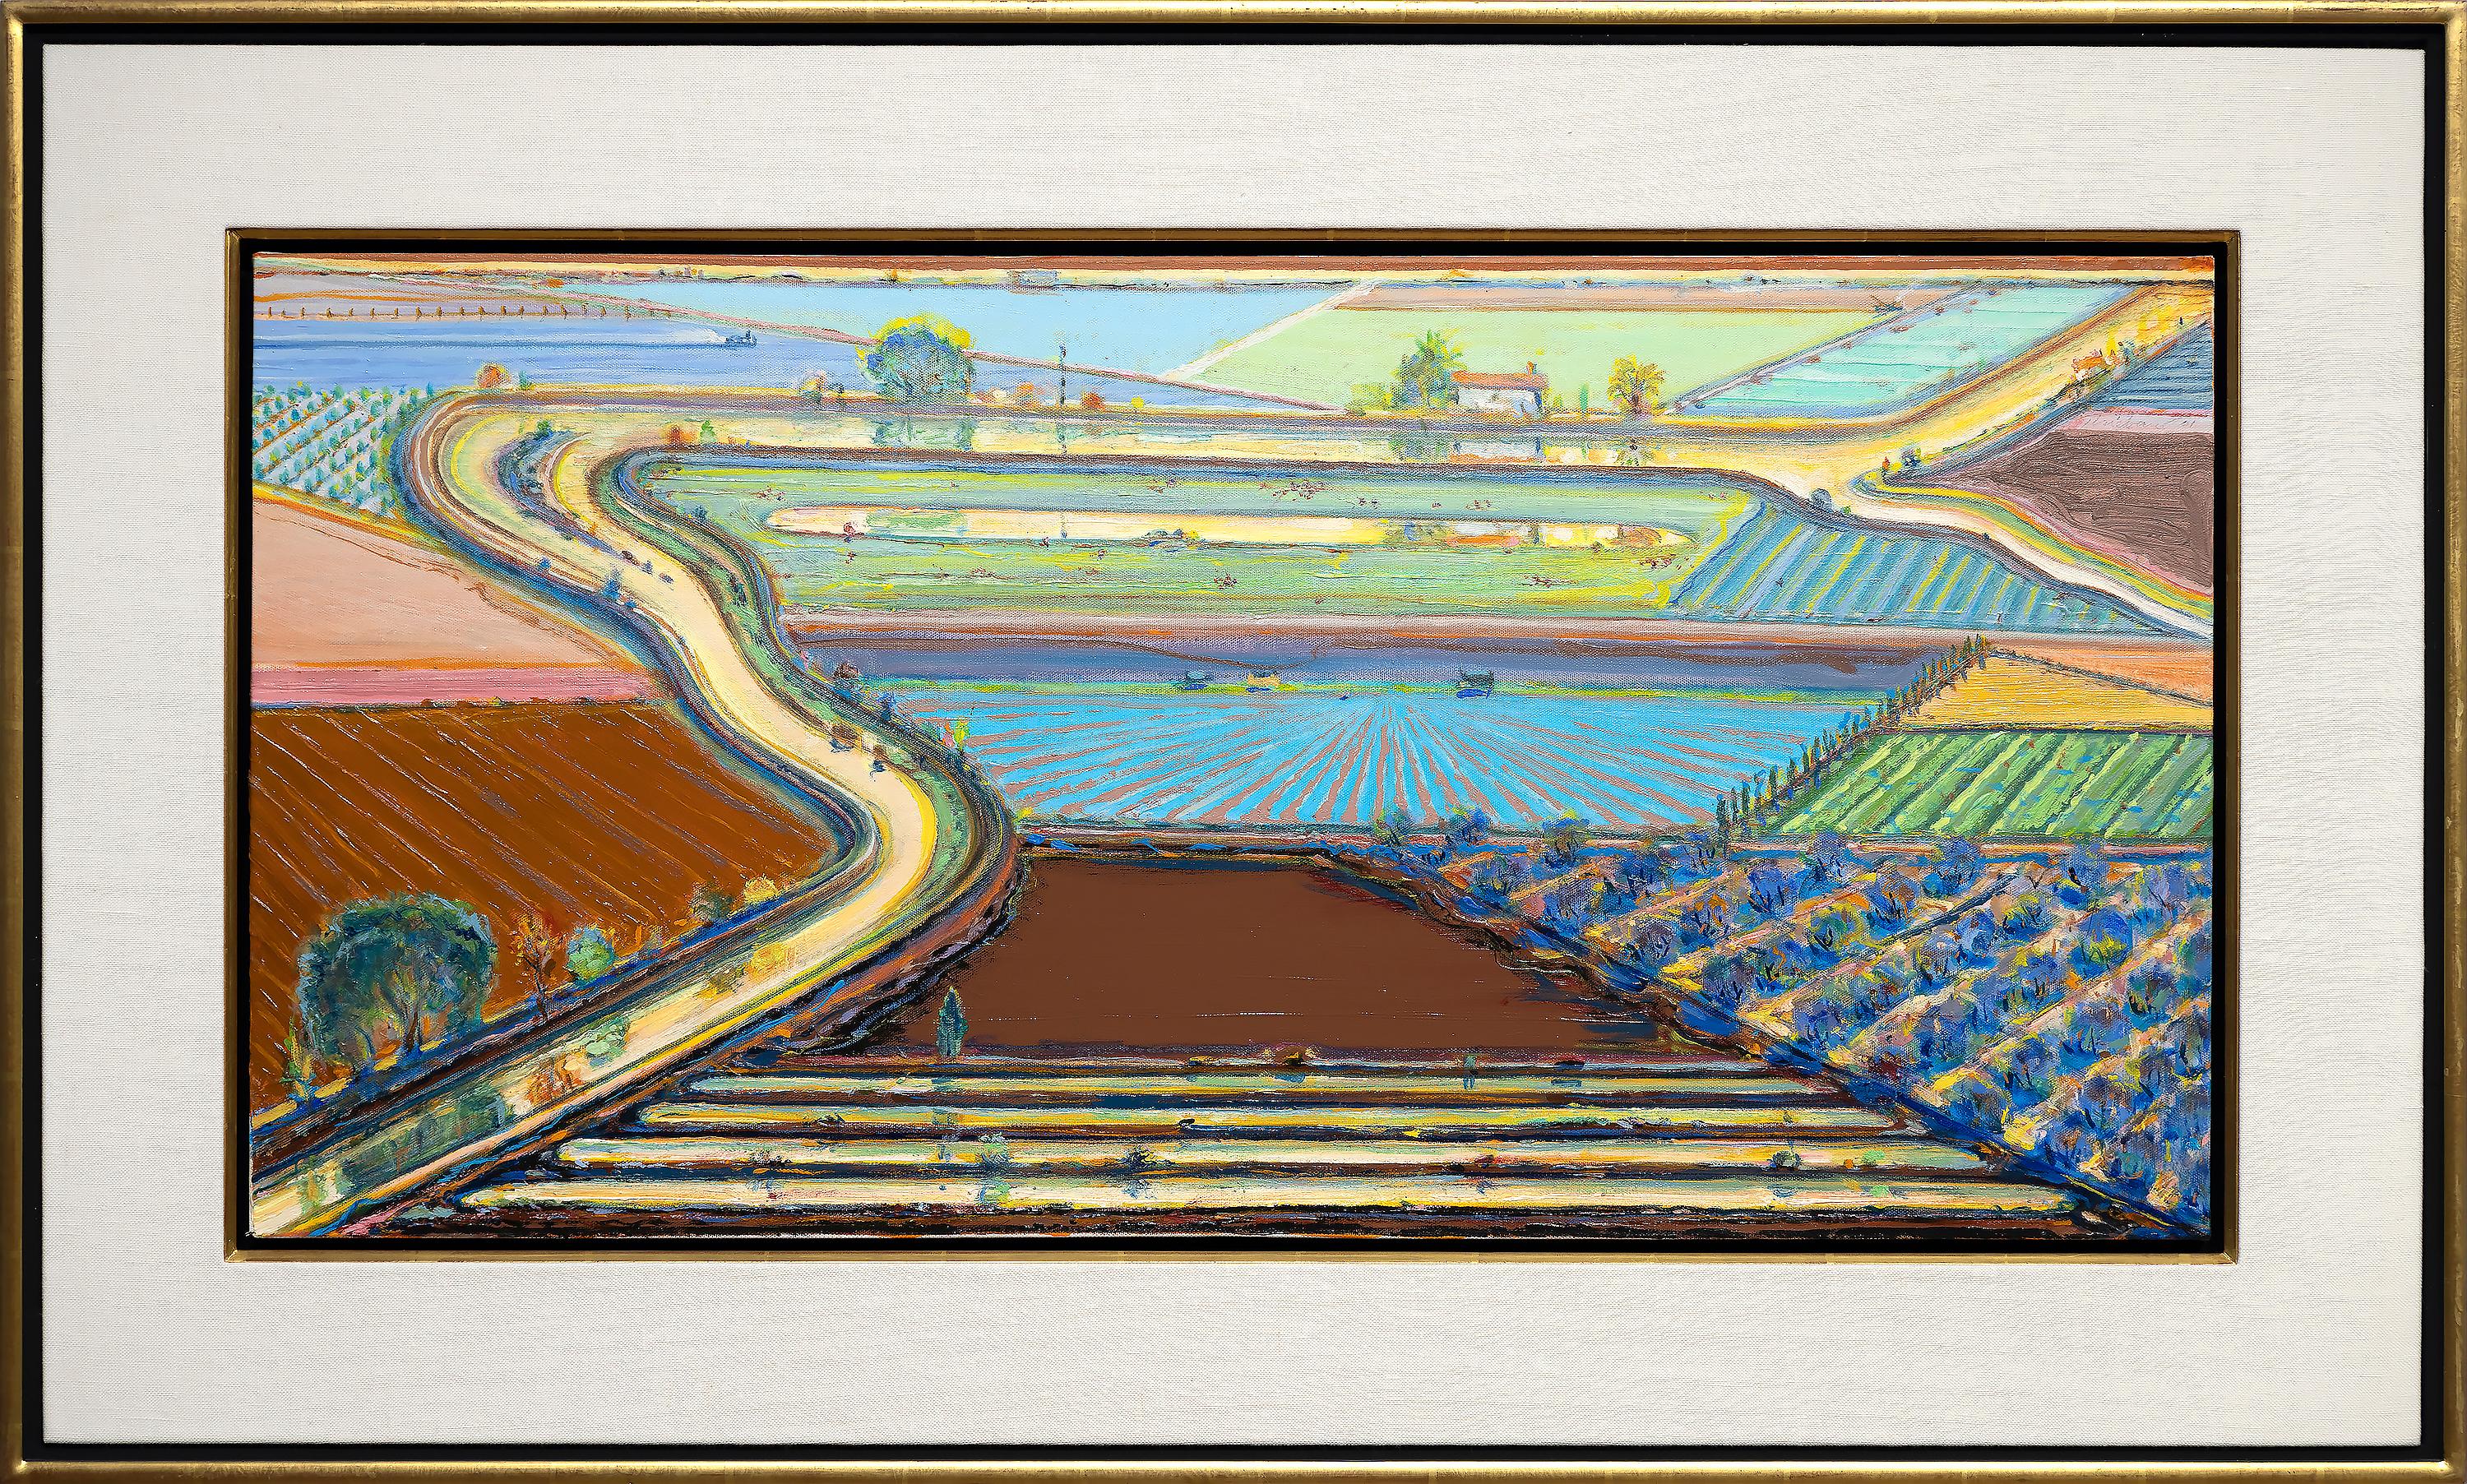 The Riverhouse - Painting by Wayne Thiebaud